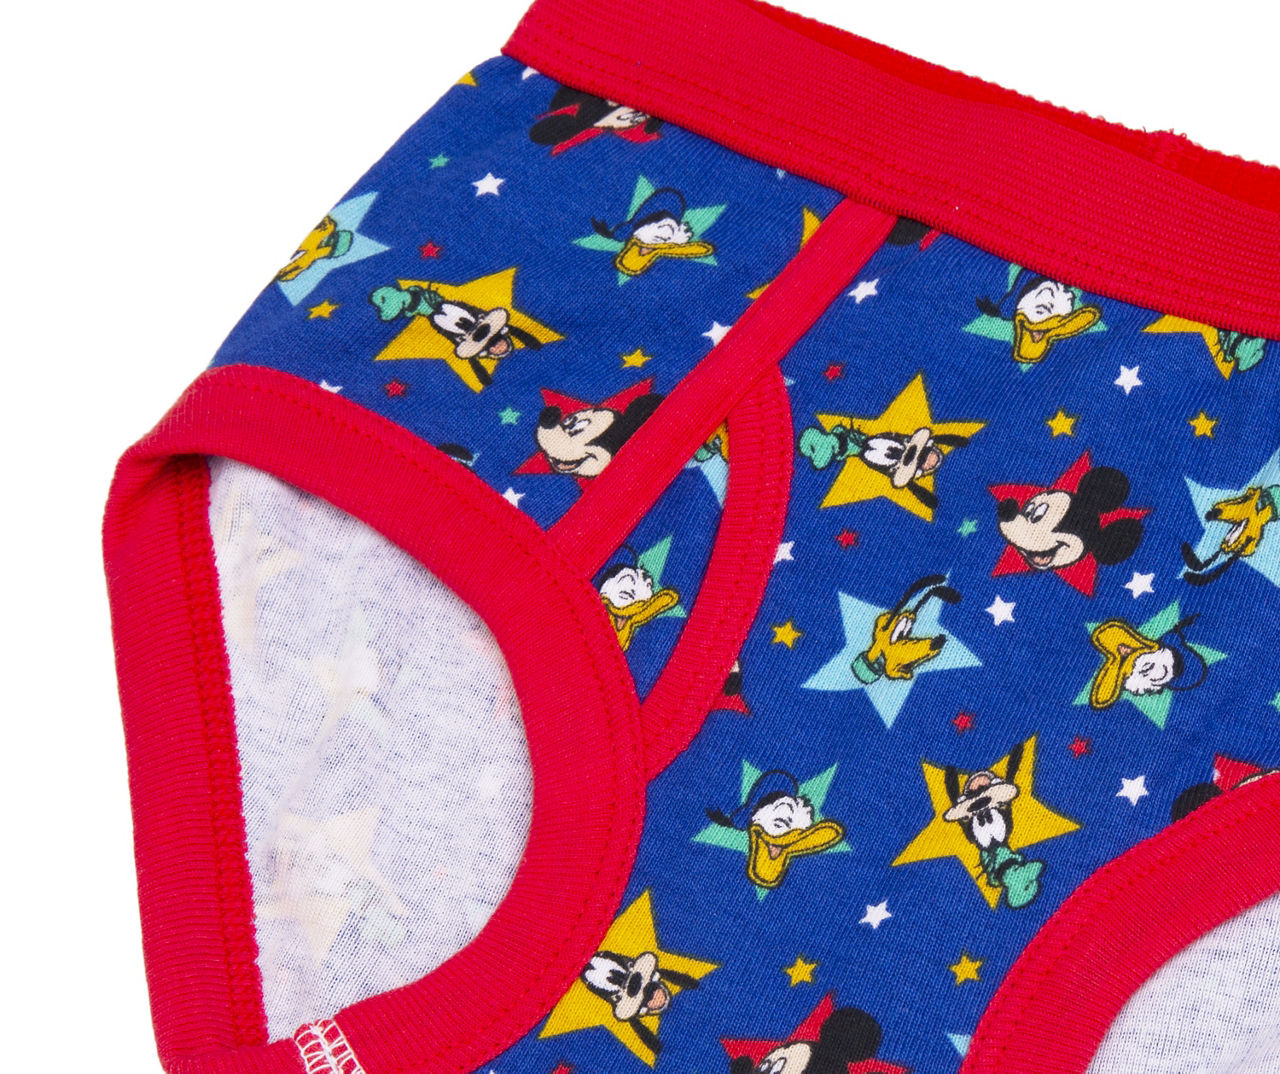 Toddler Size 4T White, Blue & Orange Briefs With Coloring Page, 5-Pack